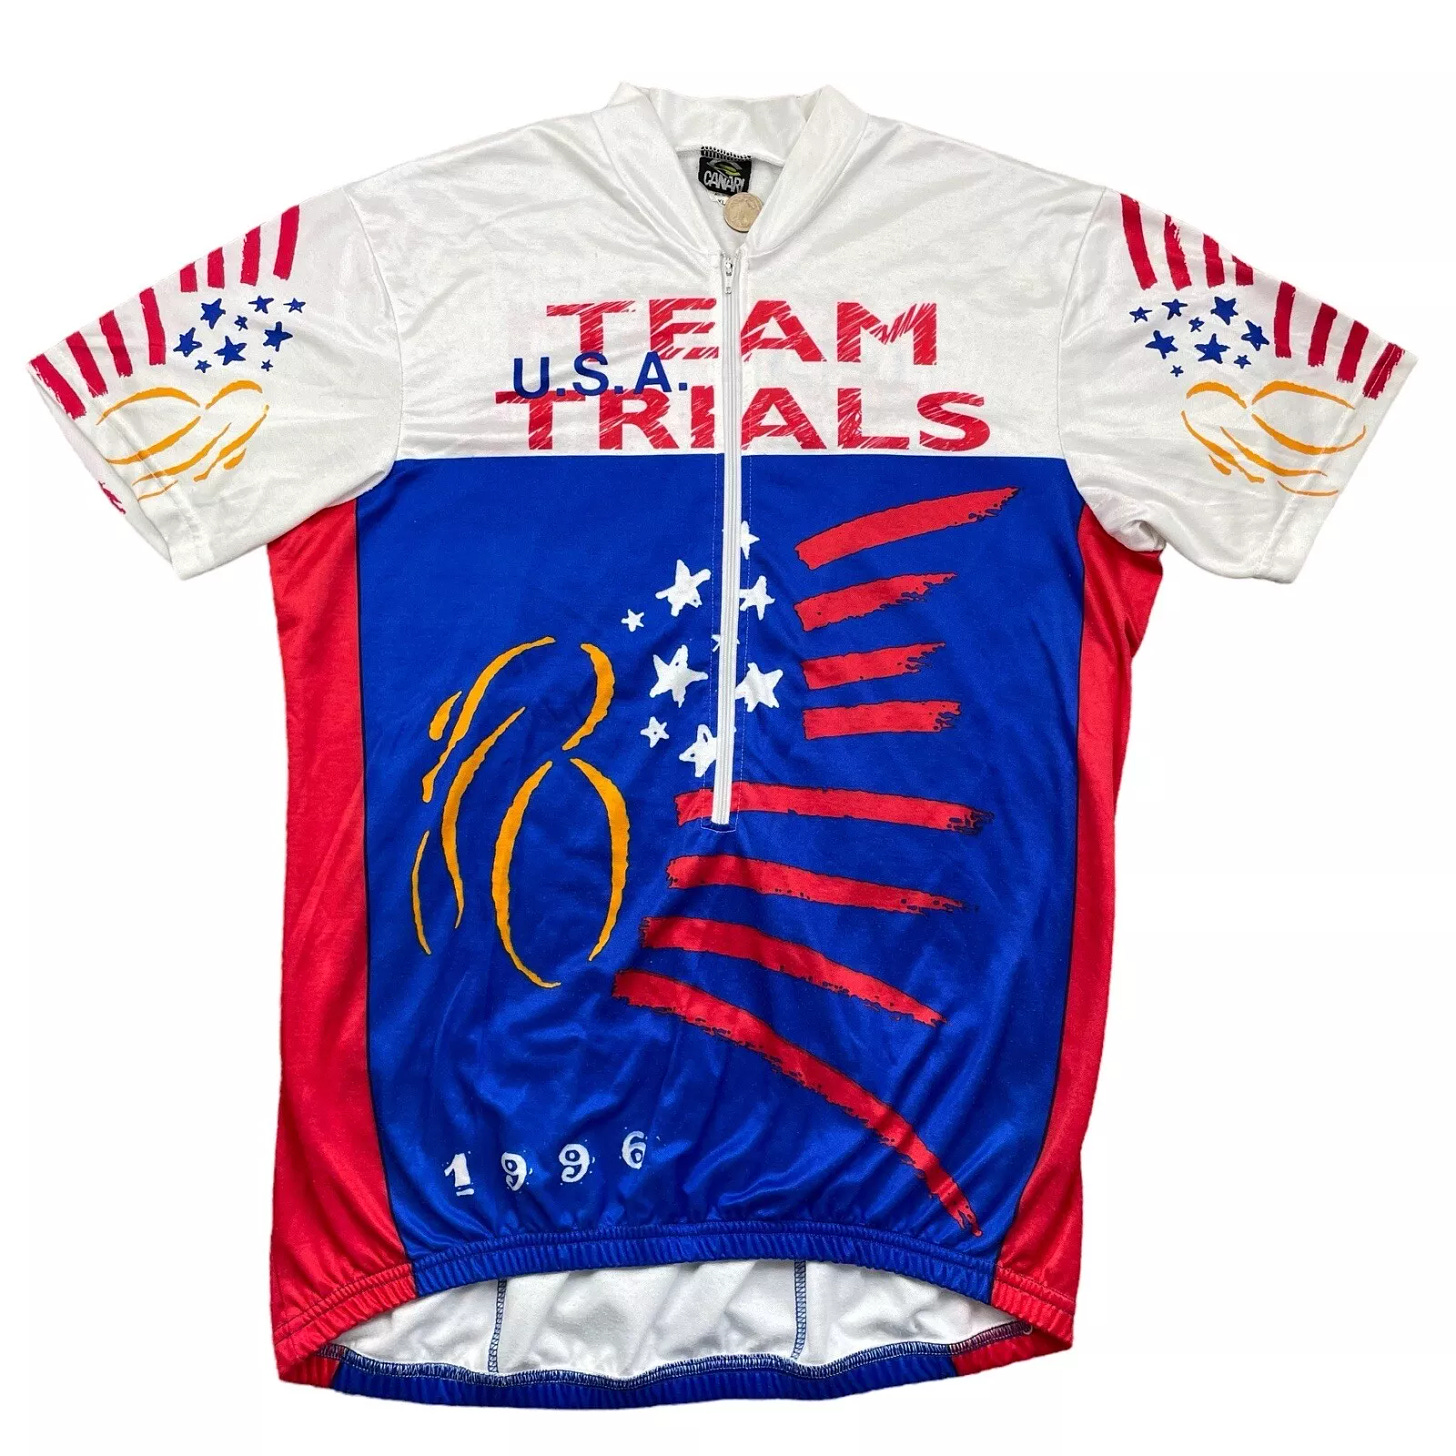 VTG 1996 Canari Team USA Time Trials Olympics Bike Cycling Jersey Men’s size XL - Picture 1 of 14